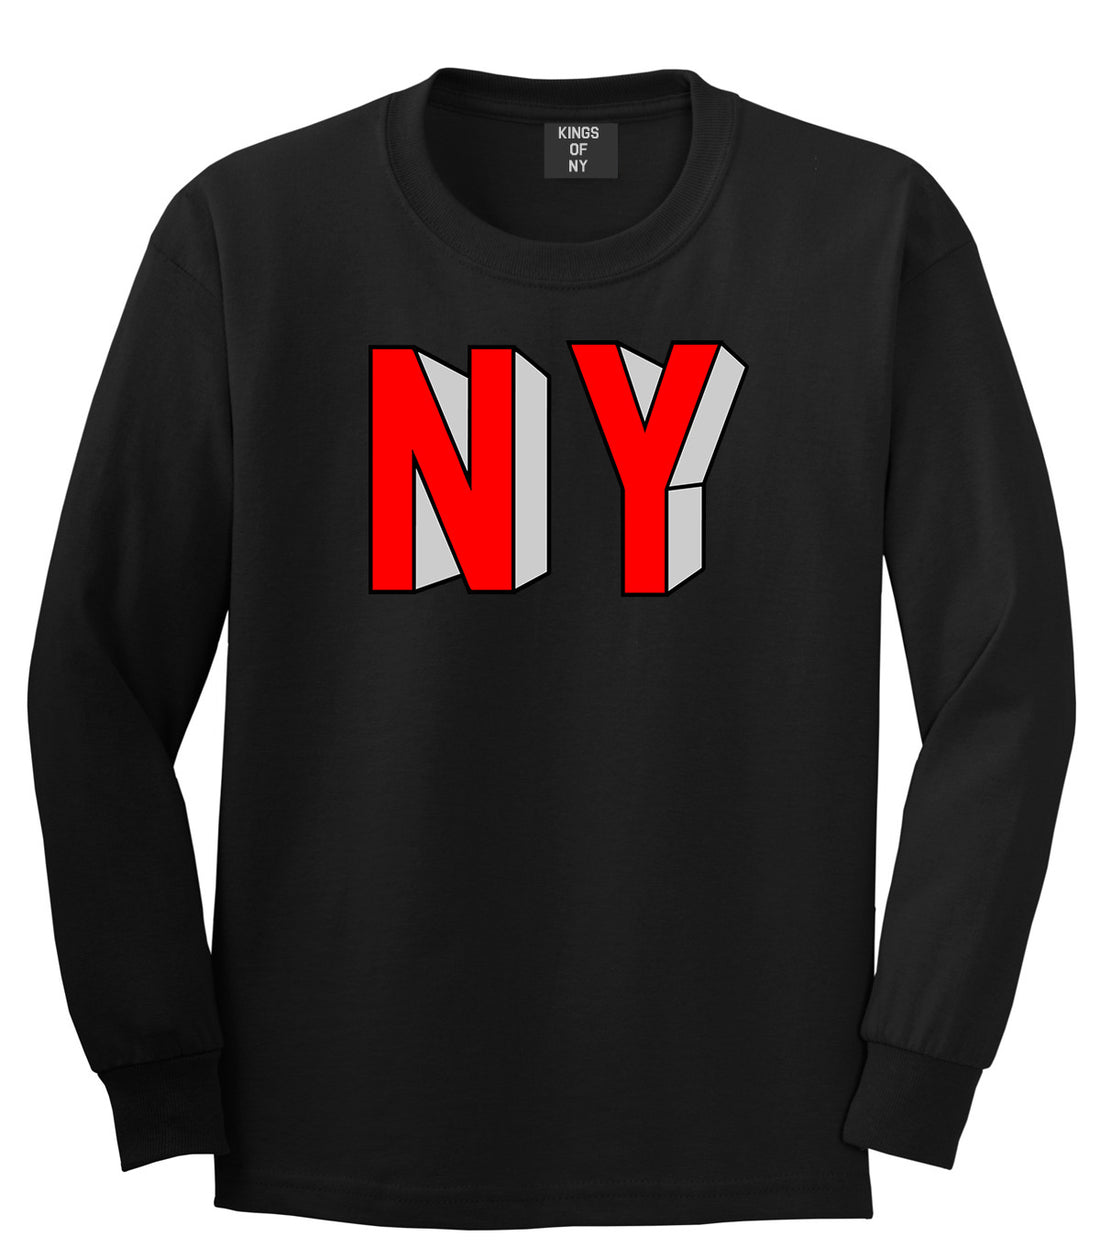 NY Block Letters Long Sleeve T-Shirt in Black